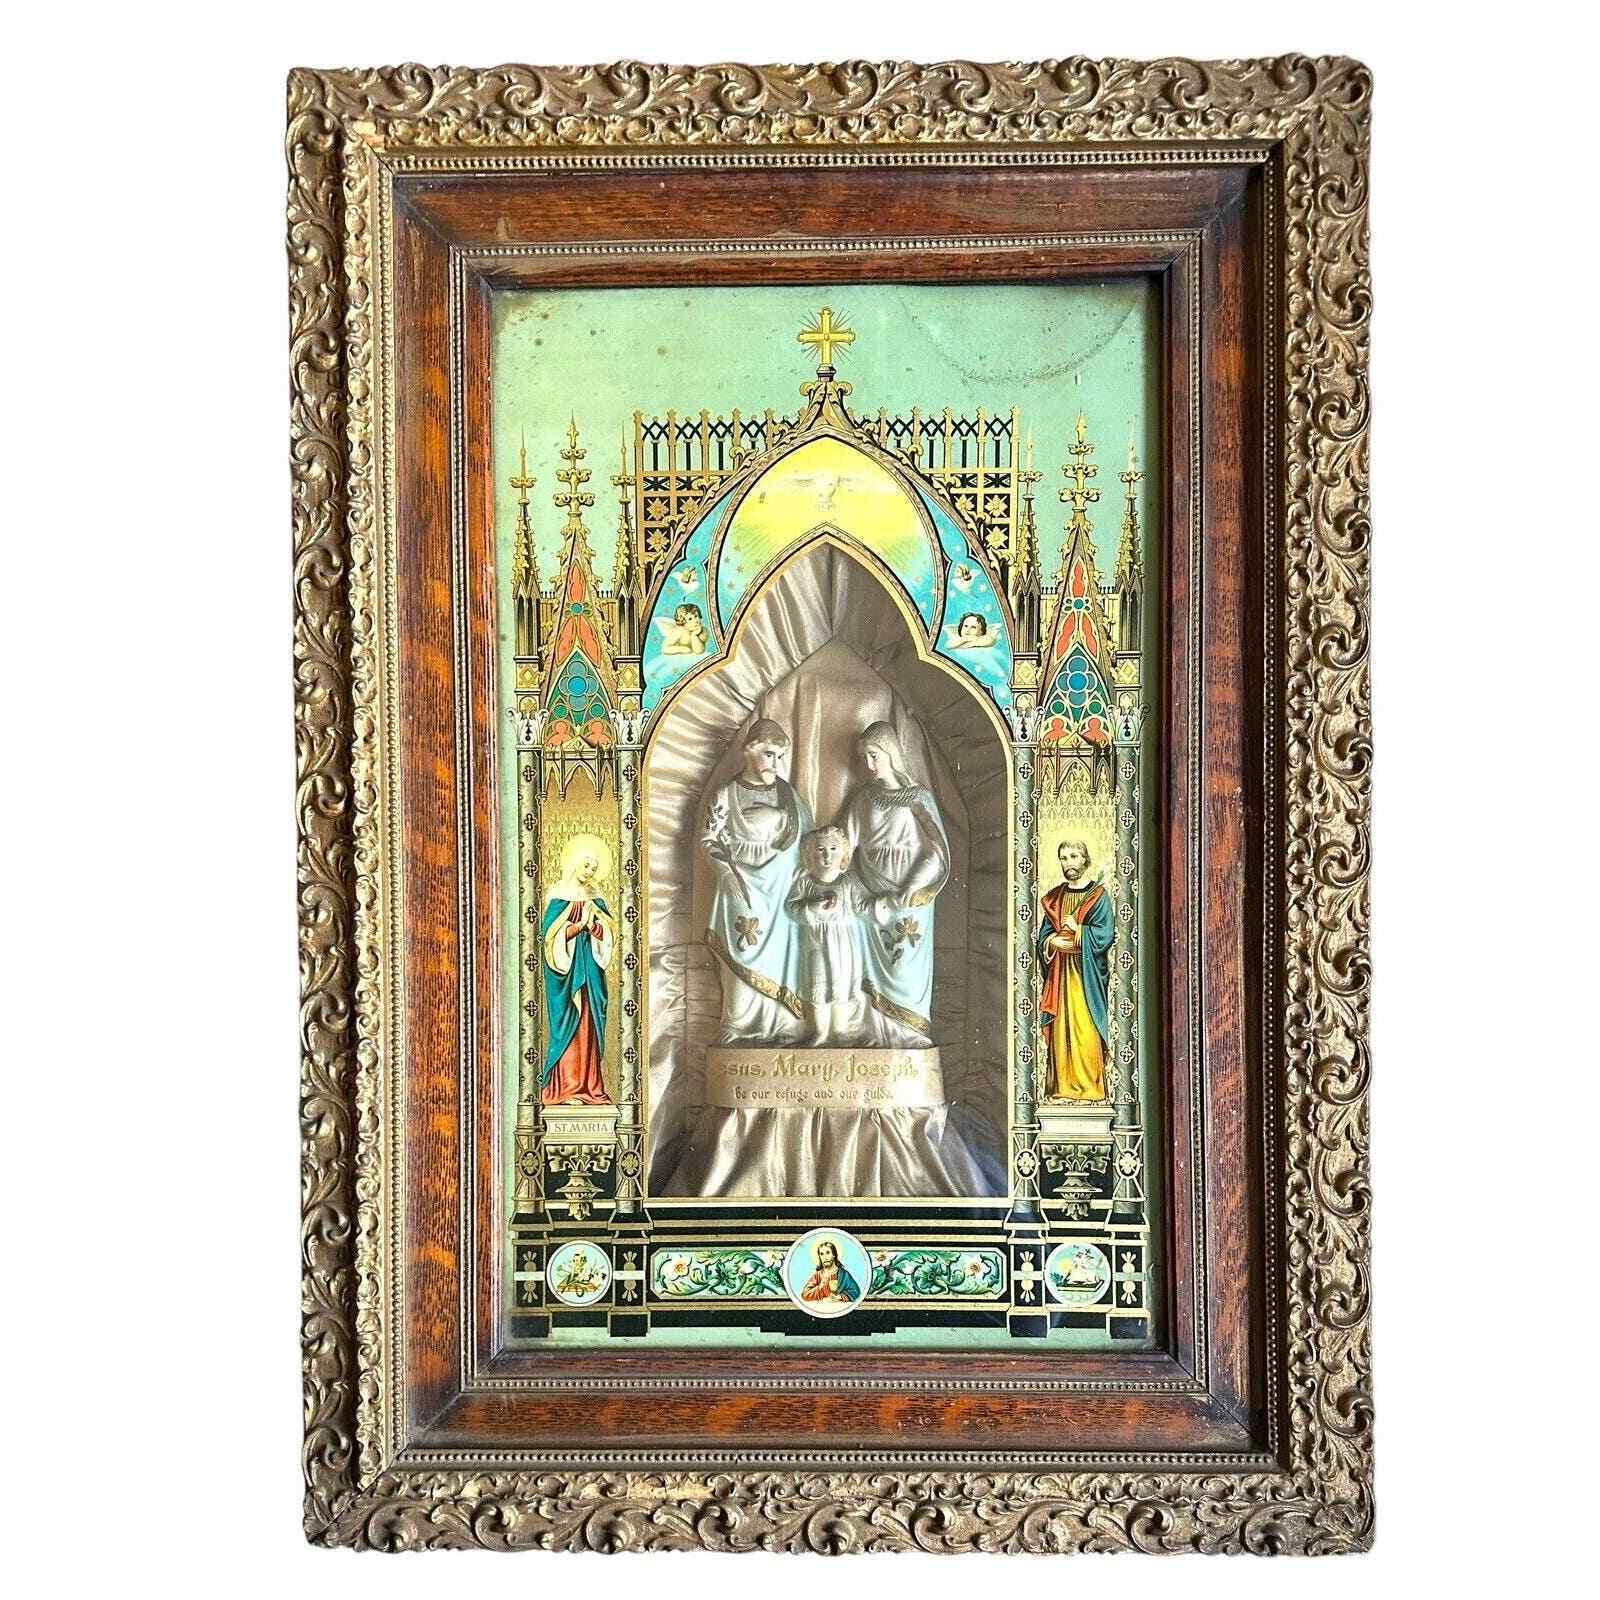 Antique Framed Sculpture of Jesus Mary and Joseph Holy Fam with Decorated Glass